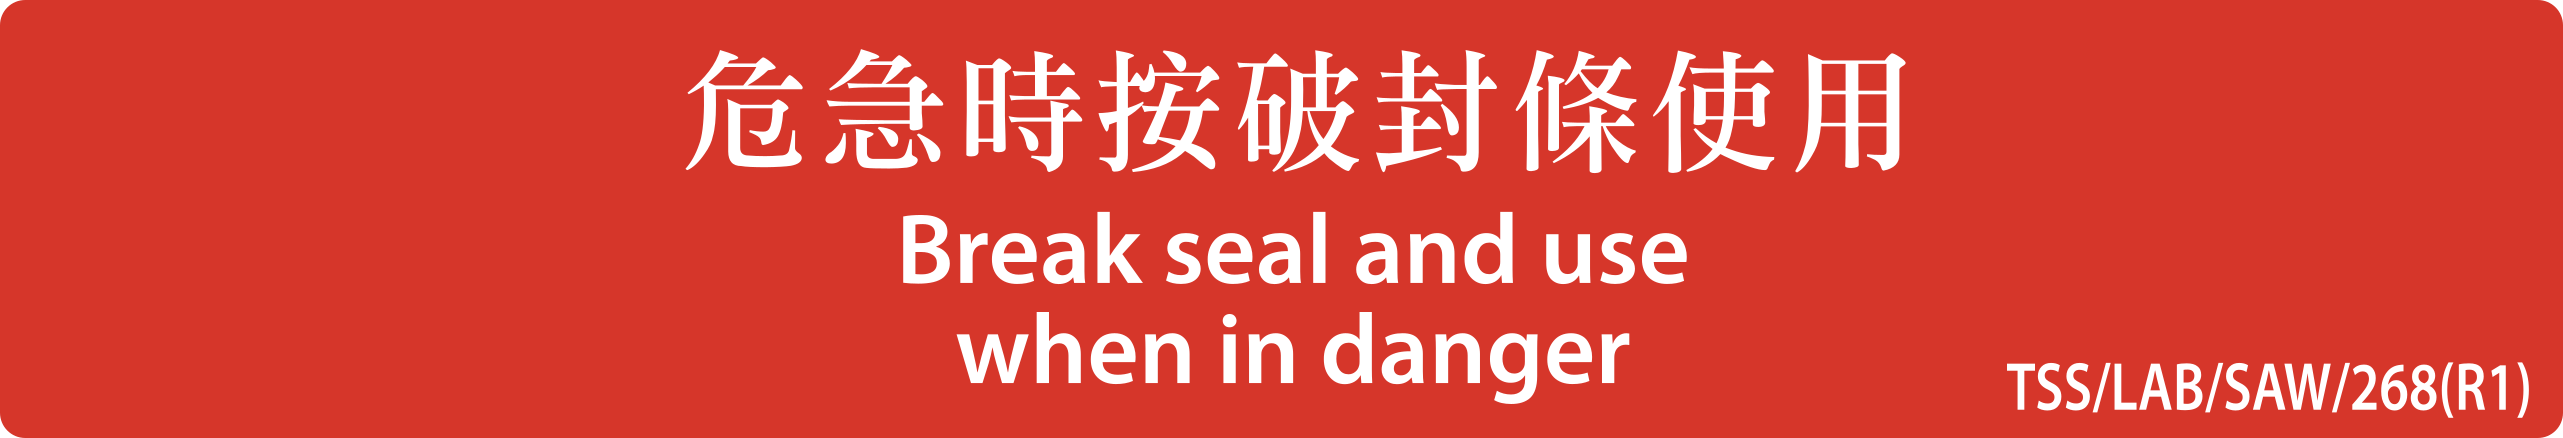 MTR sticker with red background: Break seal and use when in danger